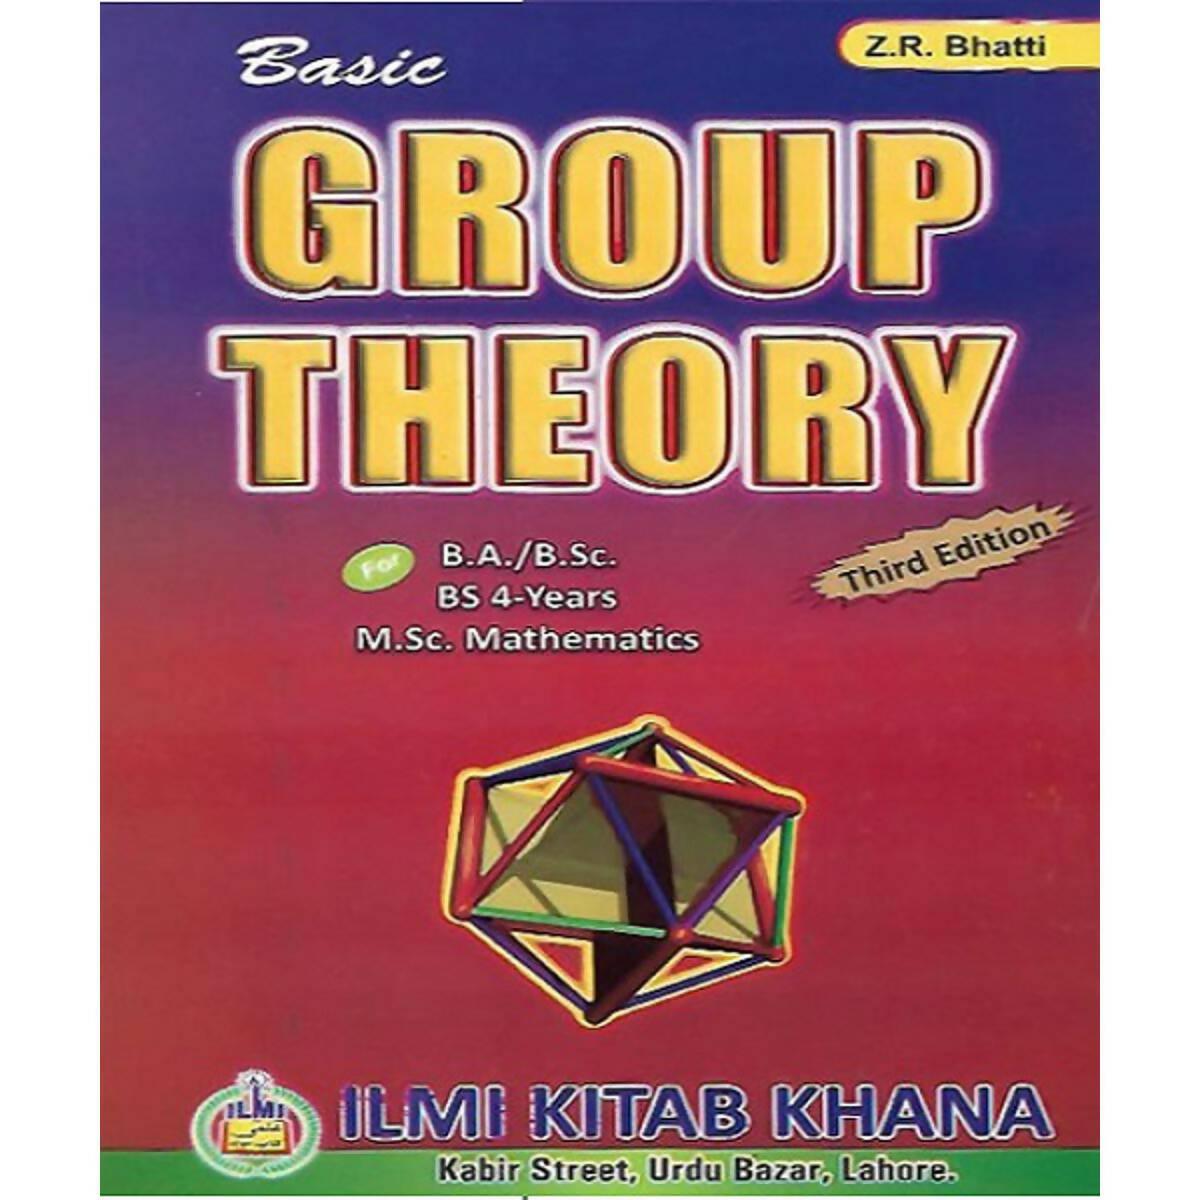 Basic Group Theory by Z R Bhatti ( 3rd Edition ) For BA BSc BS M Sc - ValueBox